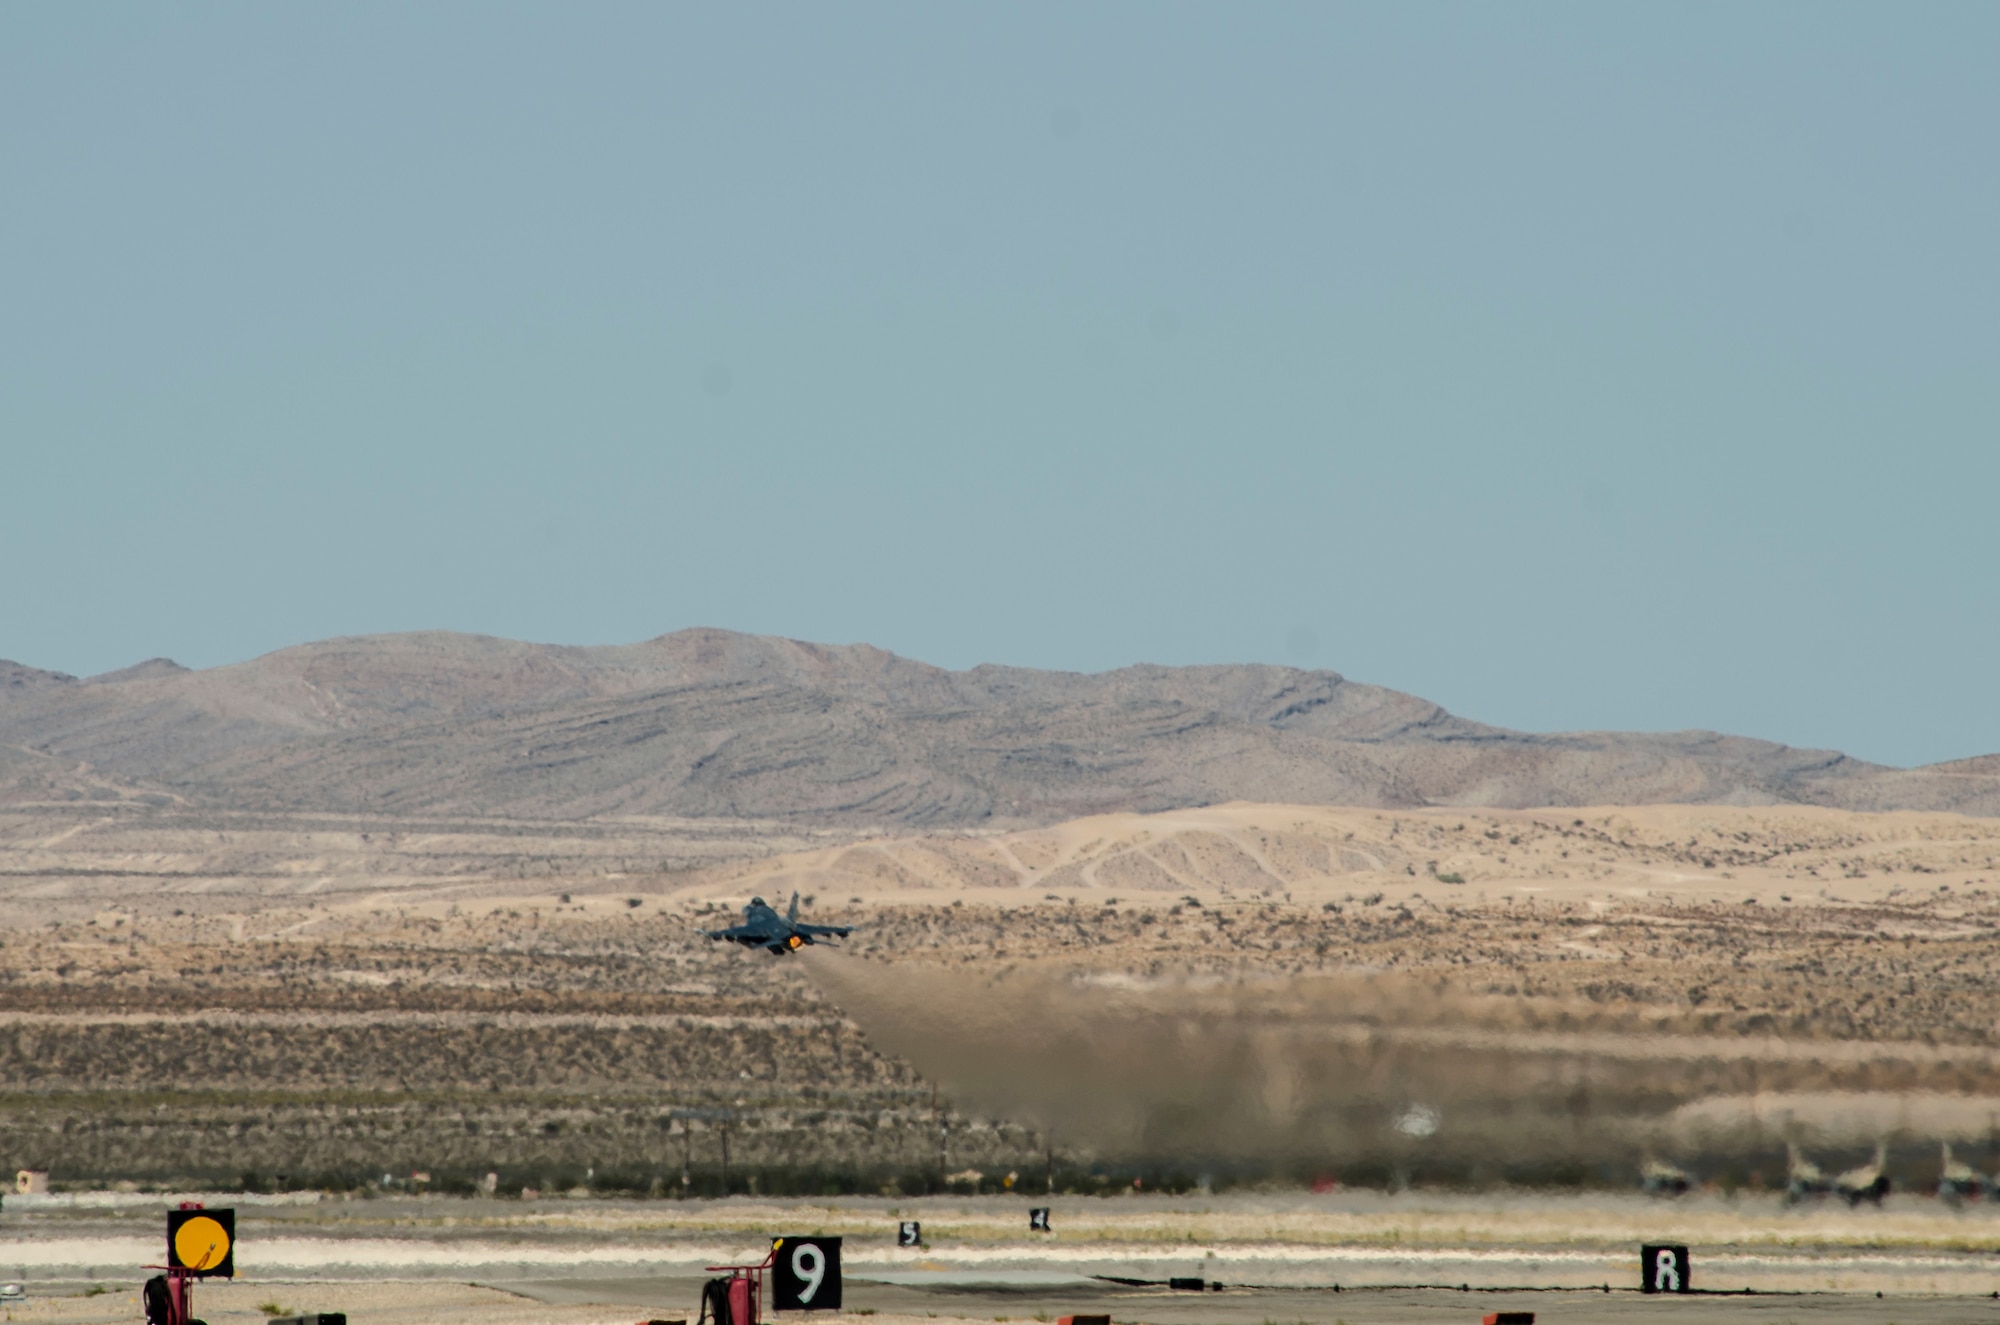 An F‐16CM Fighting Flacon assigned to the 55th Fighter Squadron, Shaw Air Force Base, S.C., takes off at Nellis Air Force Base, Nev., Aug. 13, 2016. A familiarization of the range had been conducted where players in the exercise fought against 250 aggressor forces. (U. S. Air Force photo by Tech. Sgt. Frank Miller/Released)